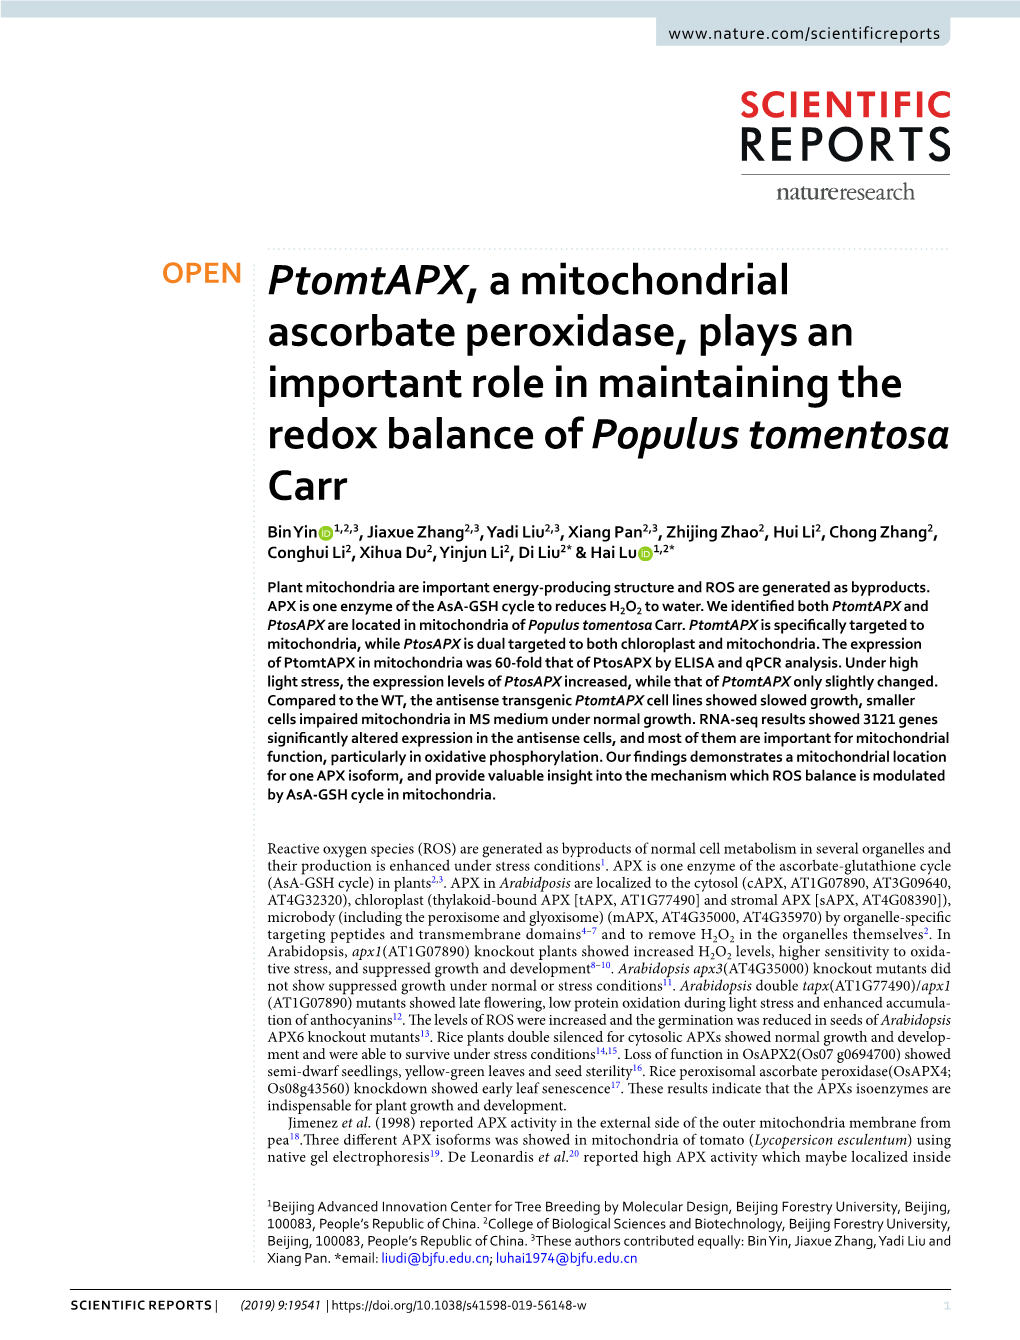 Ptomtapx, a Mitochondrial Ascorbate Peroxidase, Plays an Important Role in Maintaining the Redox Balance of Populus Tomentosa Ca